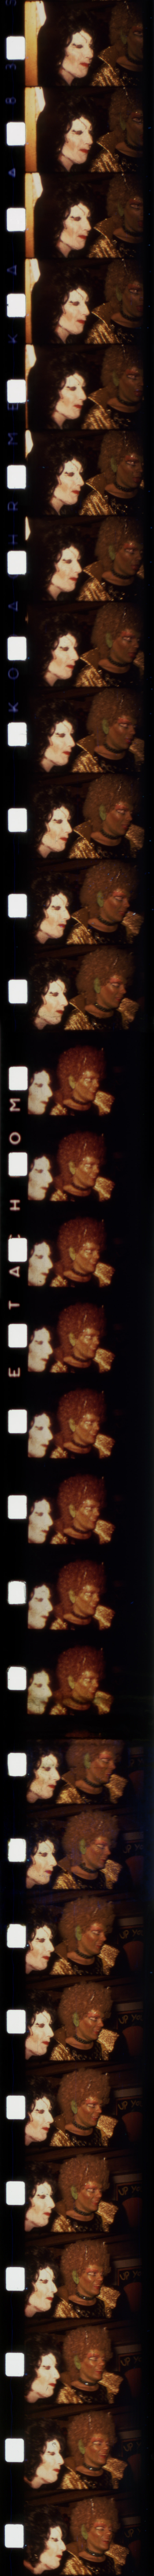 photograph from the series Michael